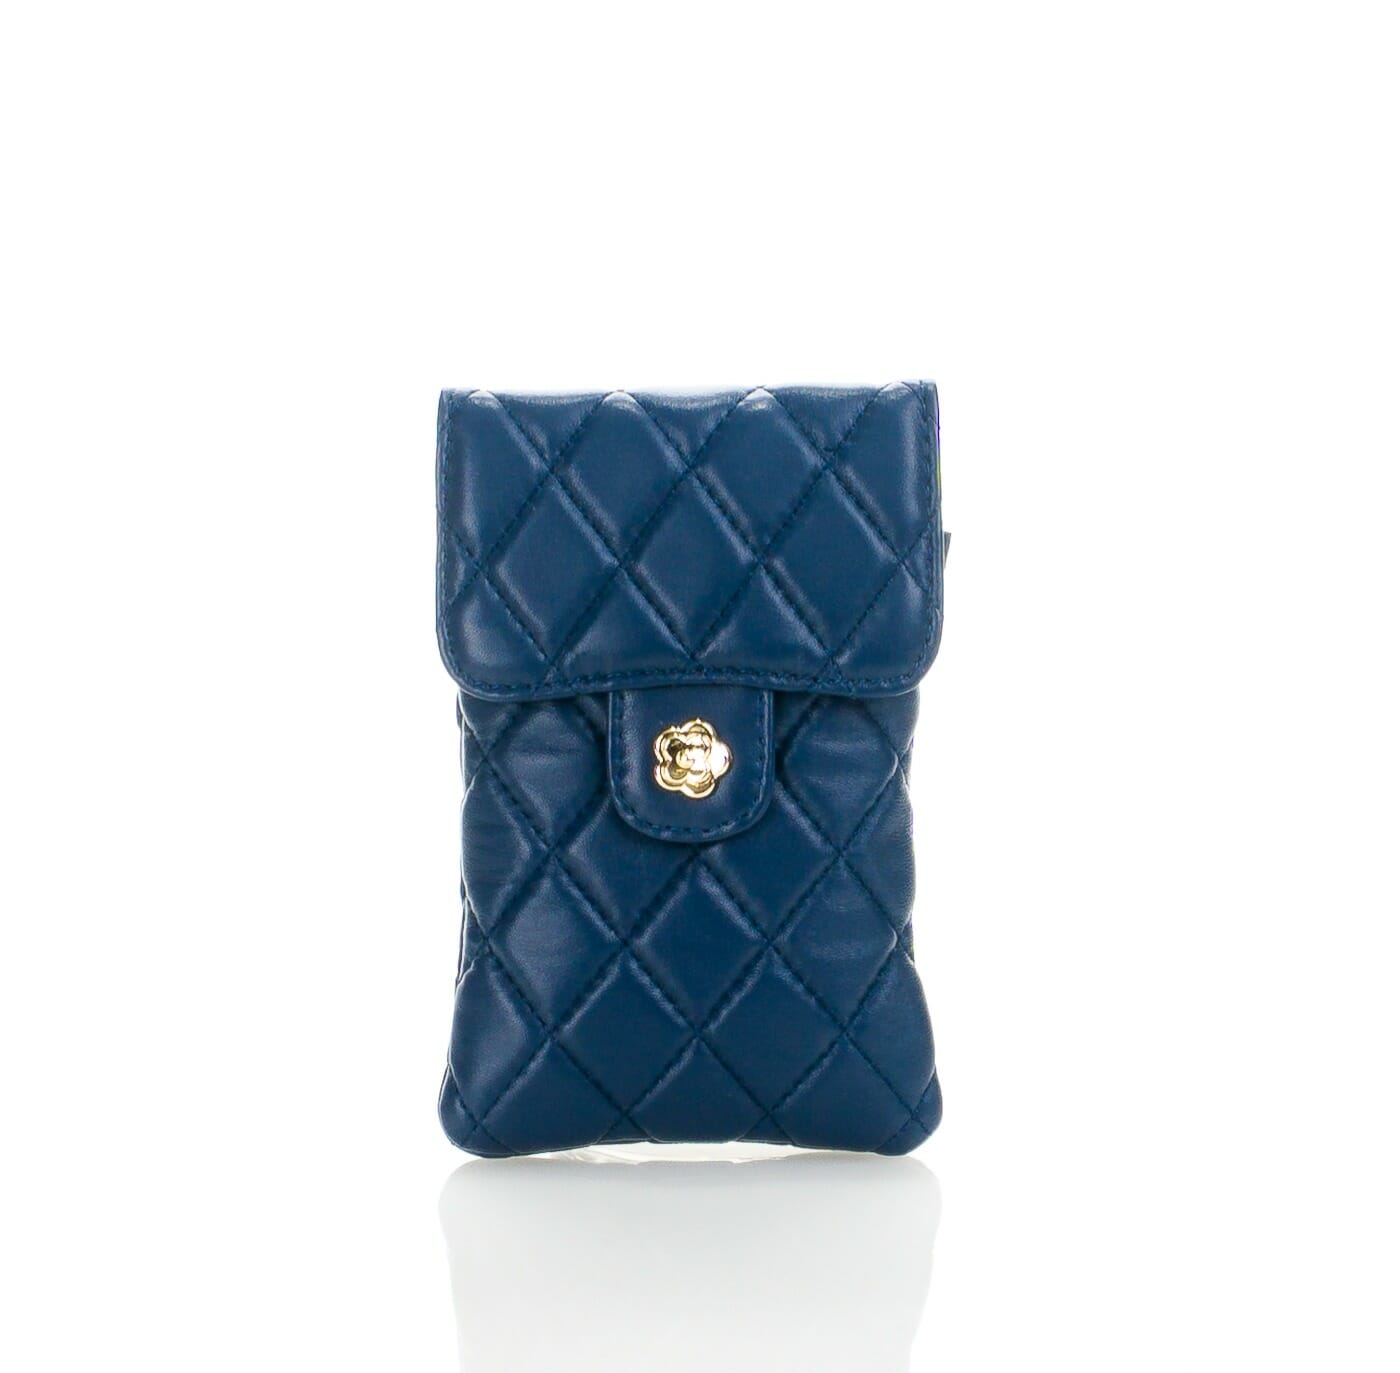 Lavanda-4 Mobile Phone Holder in Real Quilted Leather. - BLUE